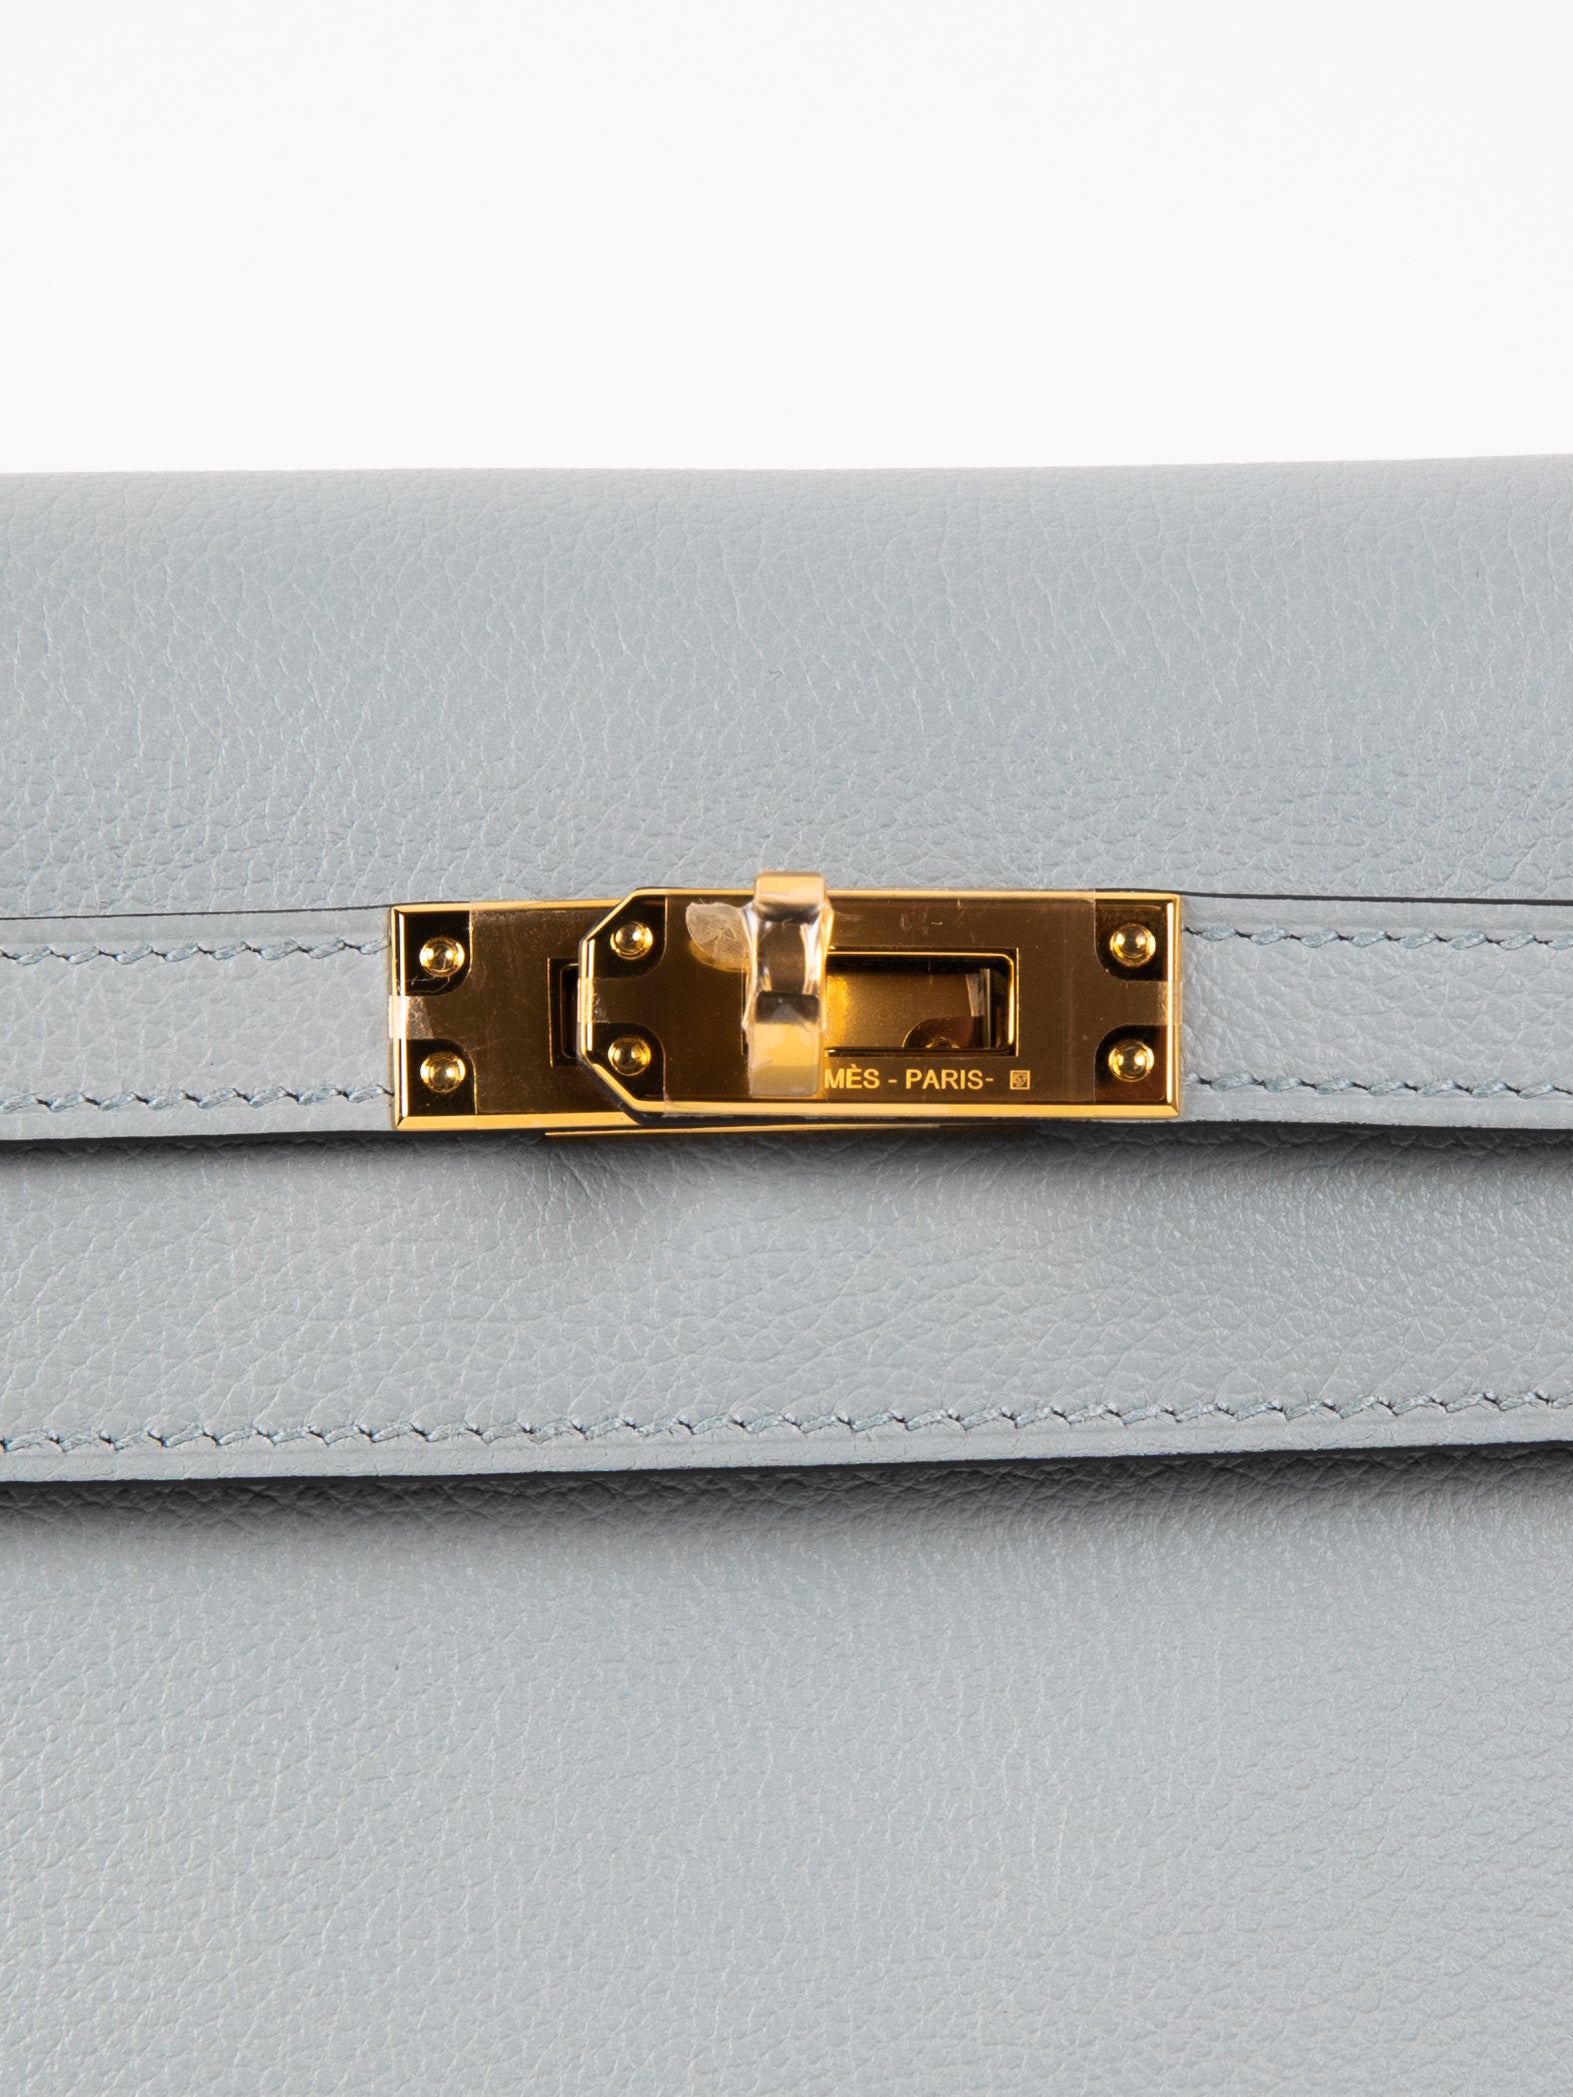 A GOLD EVERGRAIN LEATHER KELLY DANSE WITH GOLD HARDWARE, HERMÈS